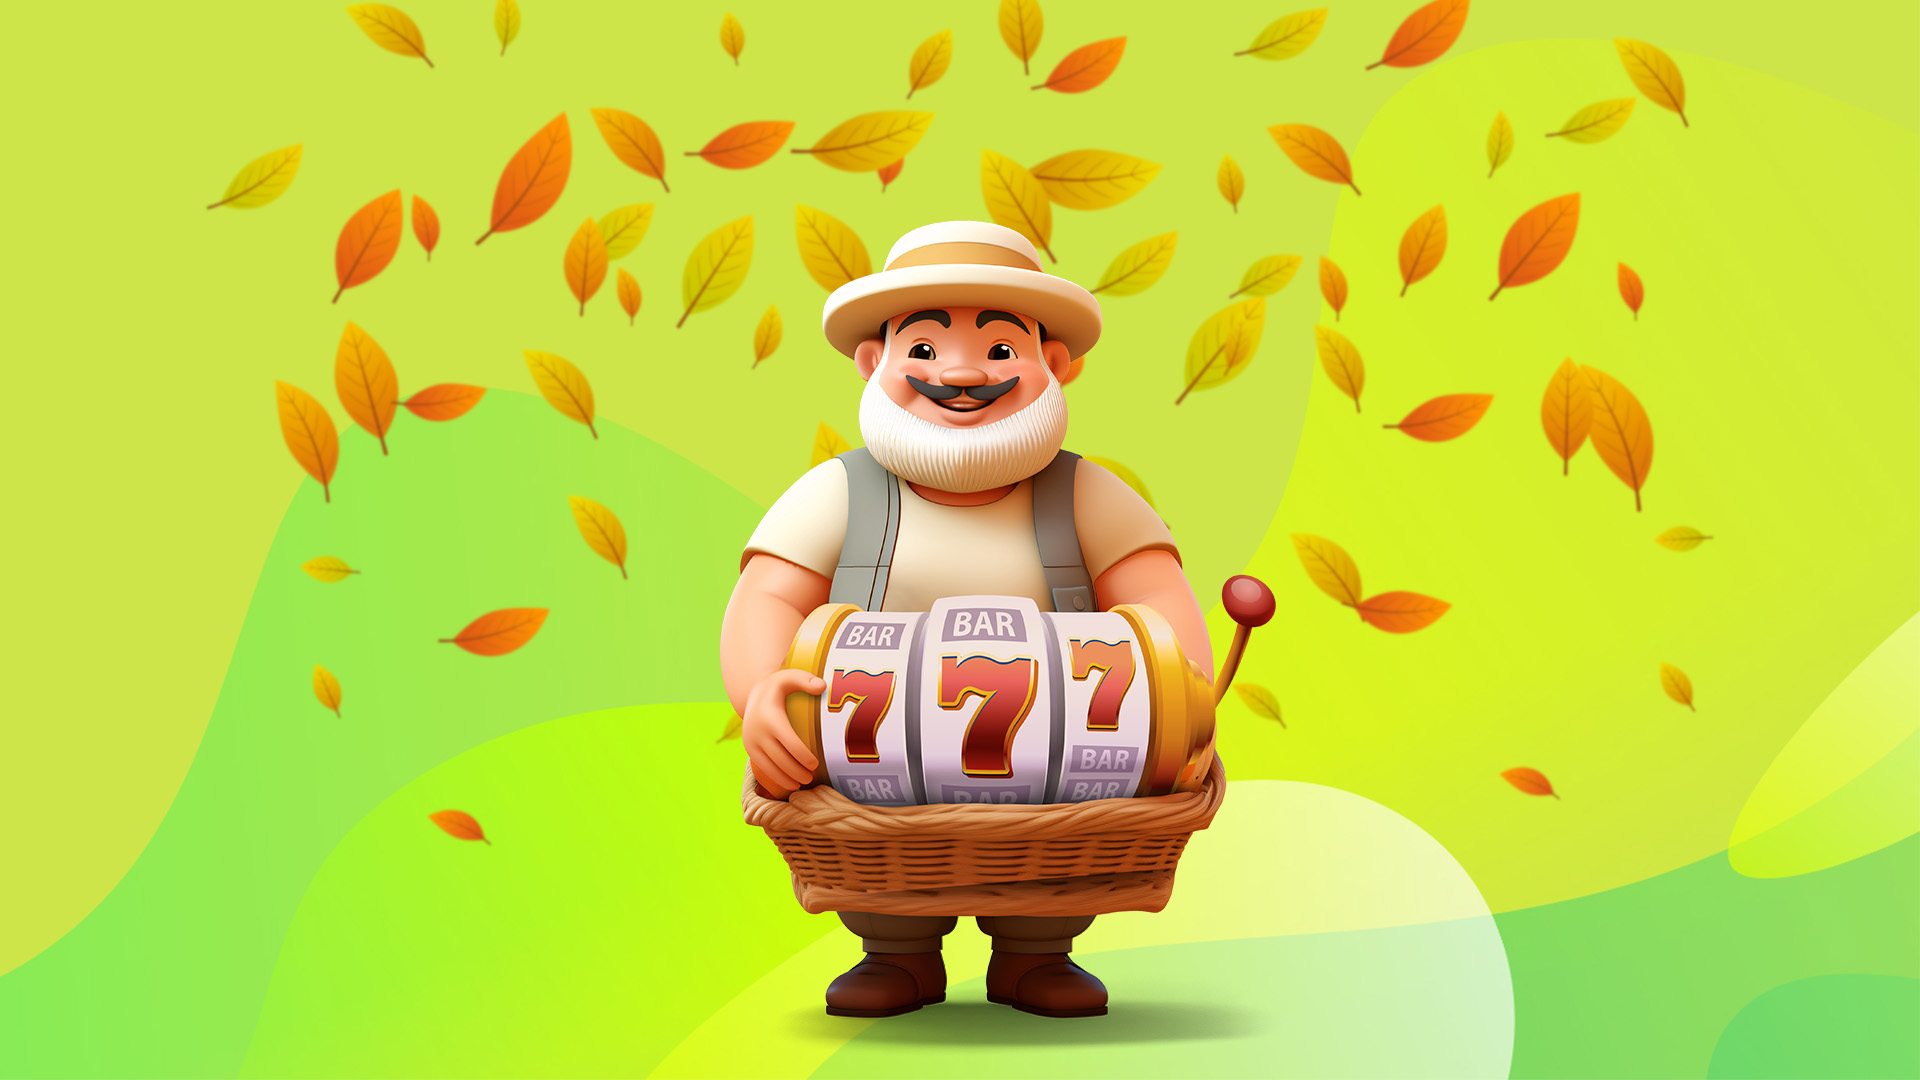 Cartoon man holds an old school slot machine in a wicker basket, surrounded by leaves, against a green background.